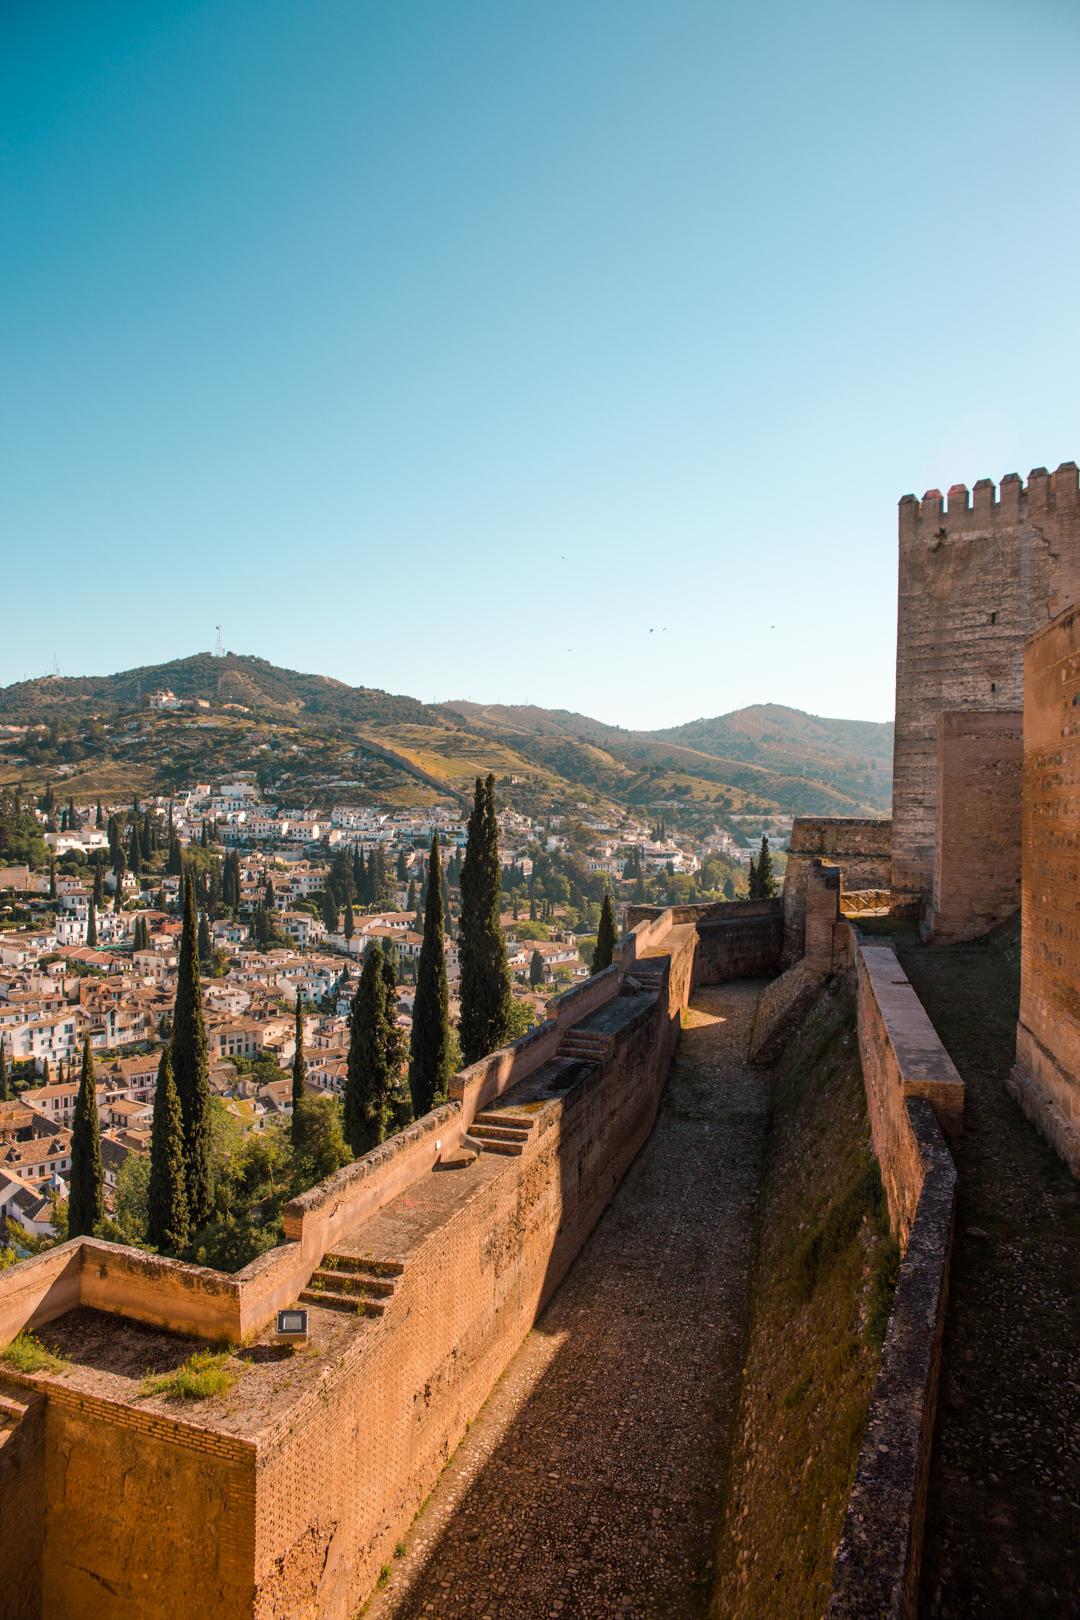 Views of the entrance of Alcazaba and Albaicin from one of the towers of the Alcazaba in Alhambra, Granada.